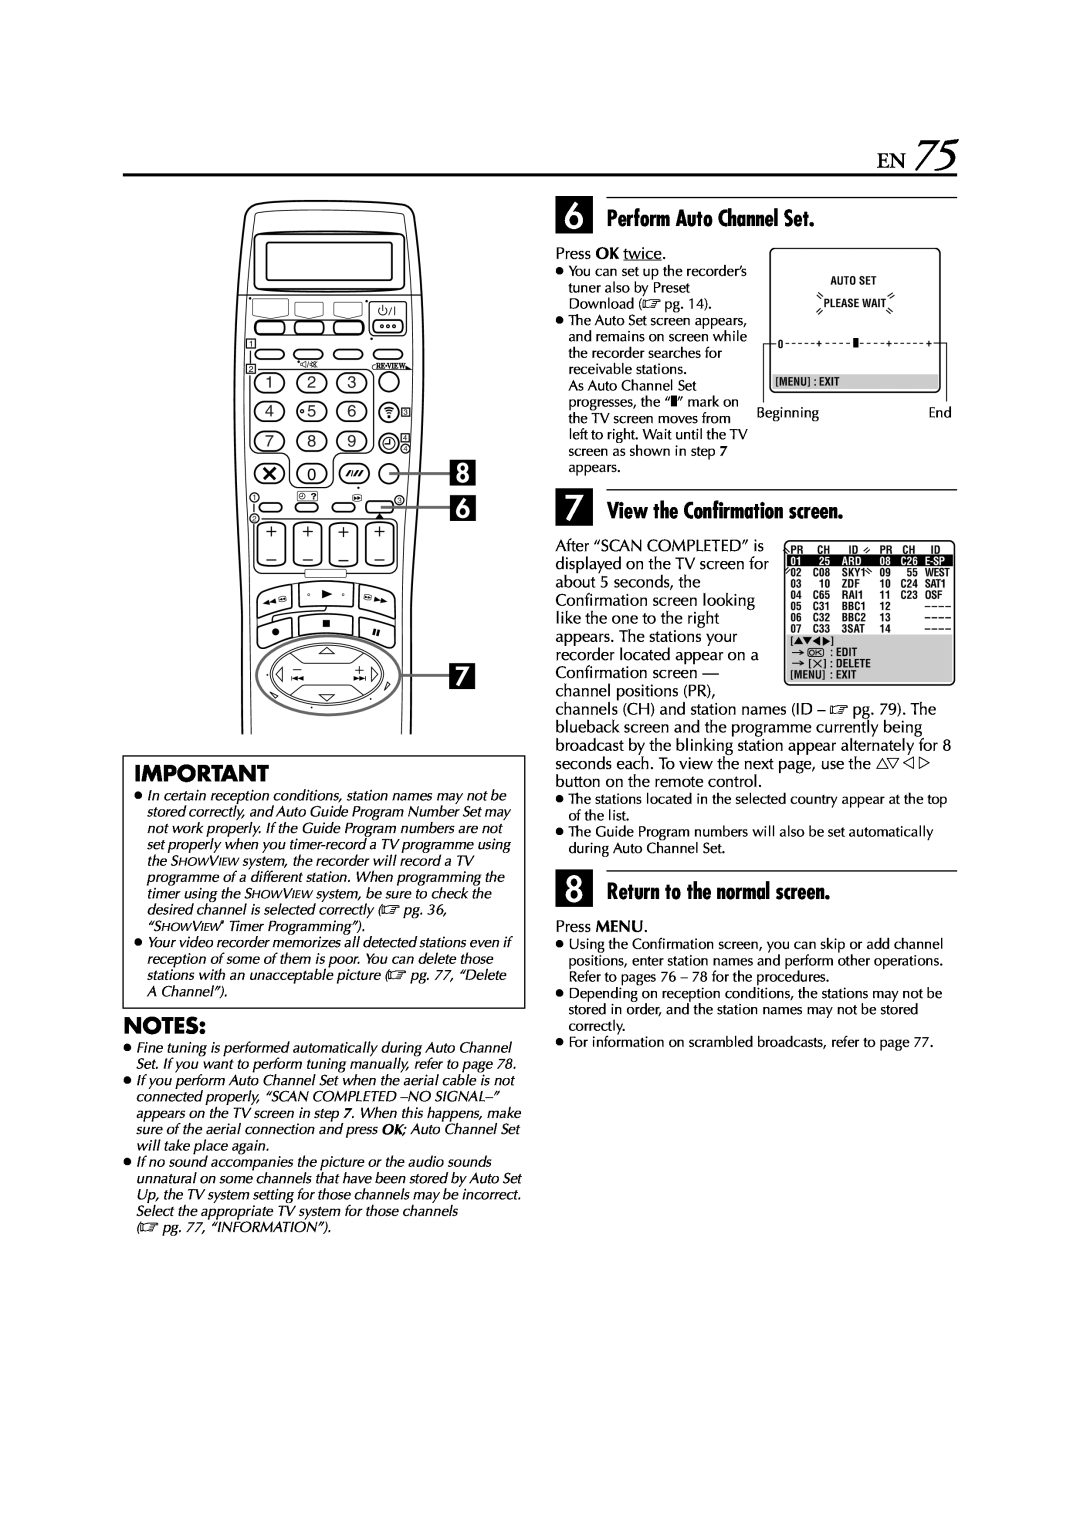 JVC LPT0616-001A specifications F Perform Auto Channel Set, G View the Confirmation screen, H Return to the normal screen 